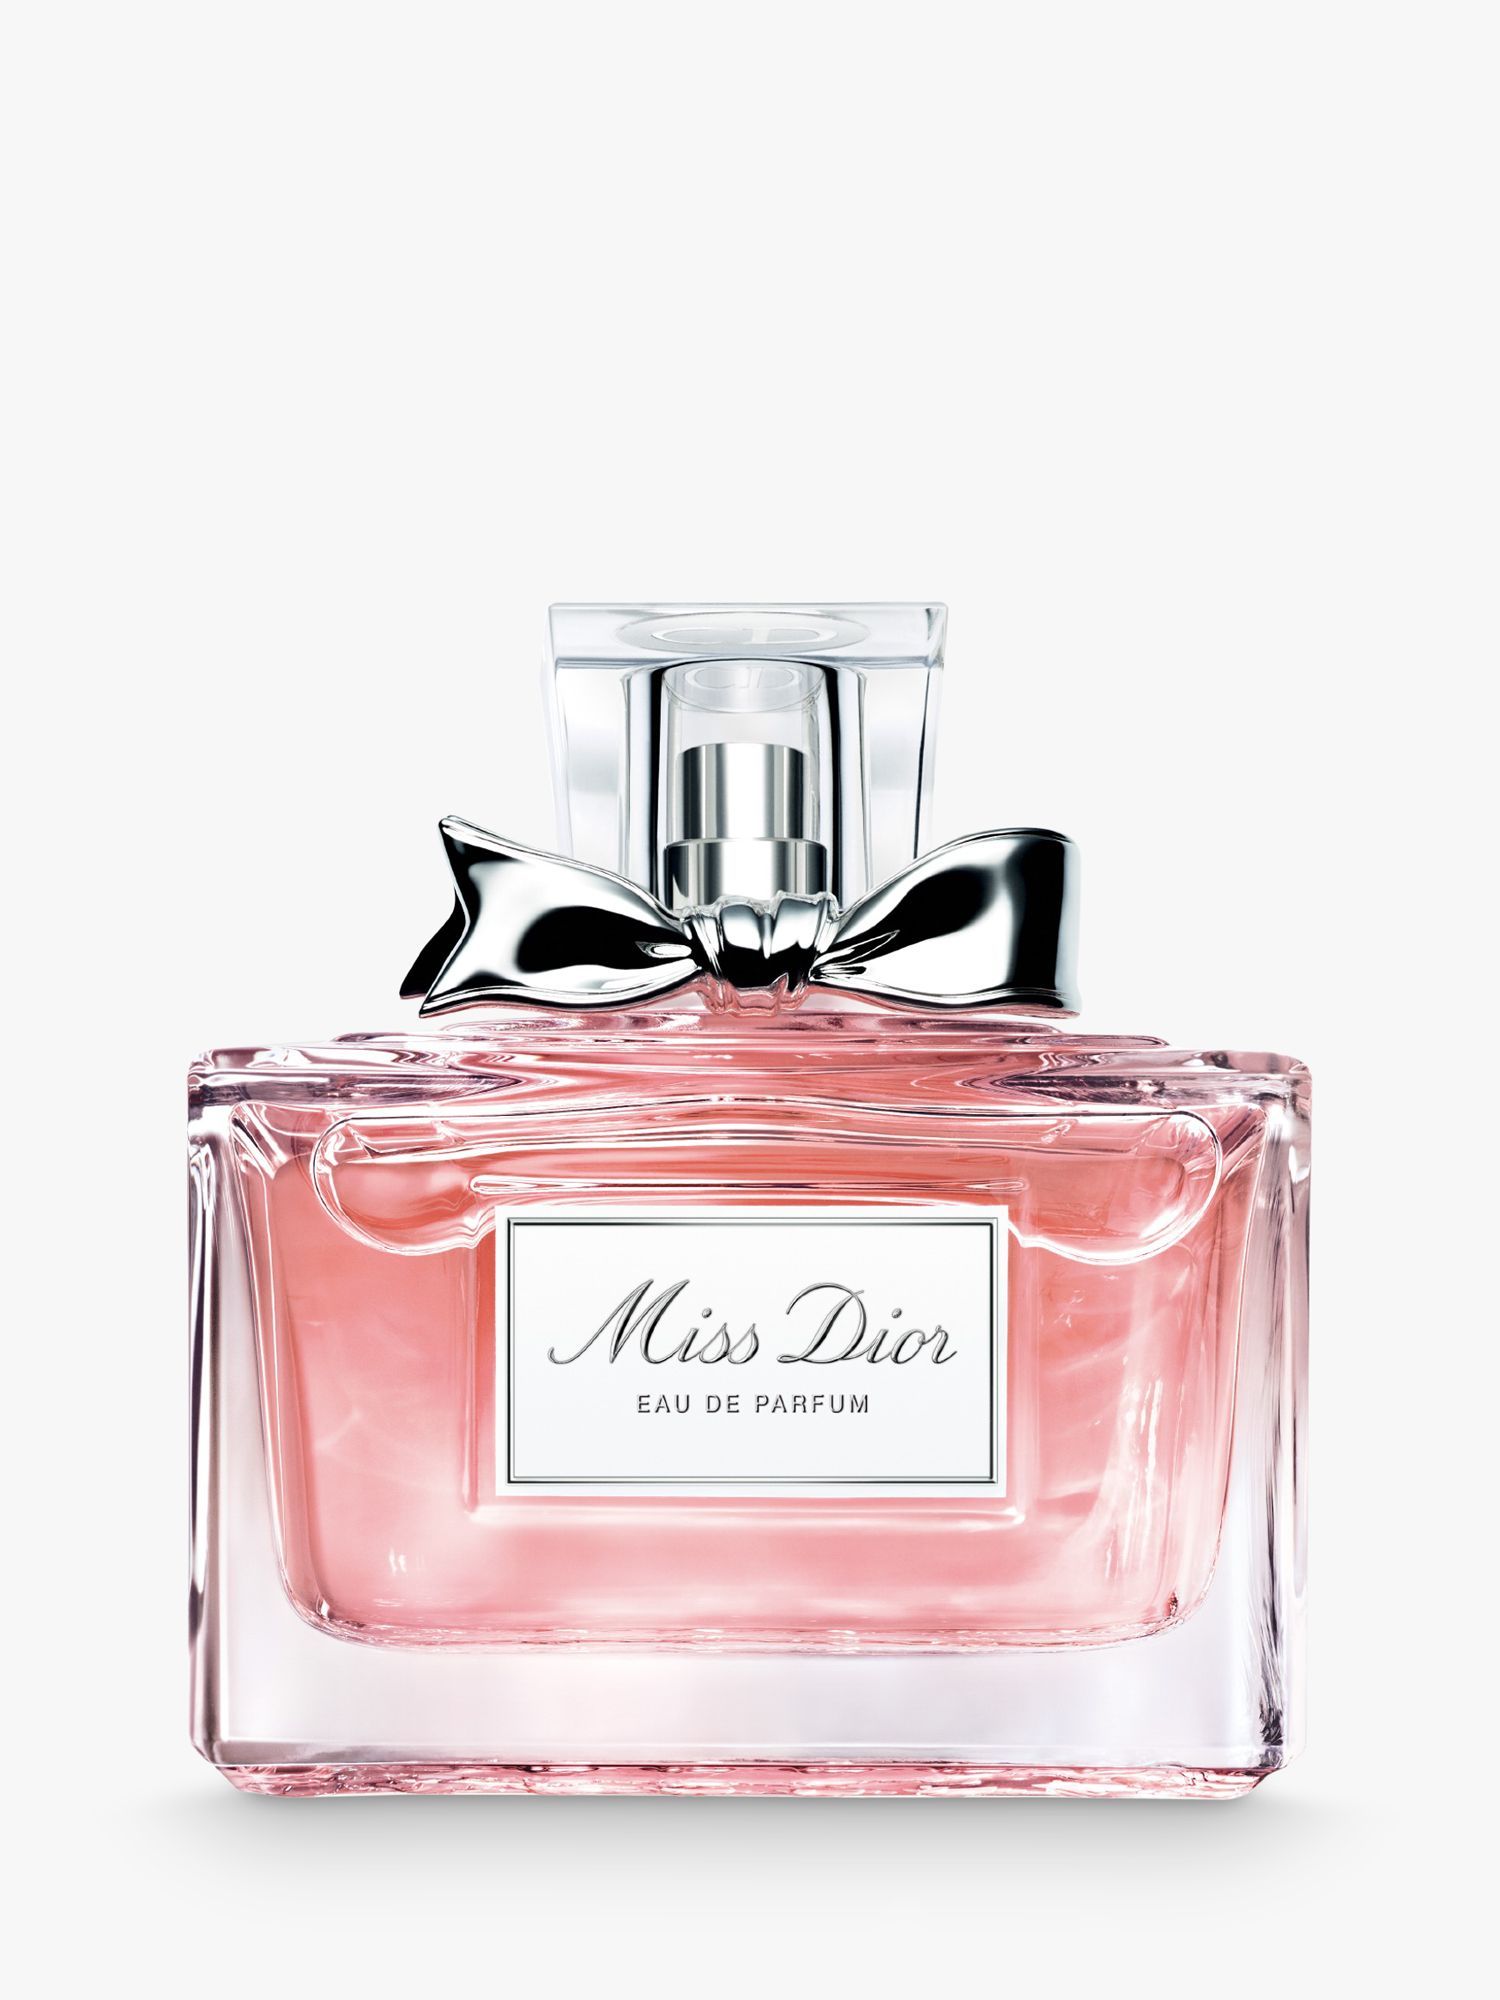 Black Friday Perfume Deals 2020: The 